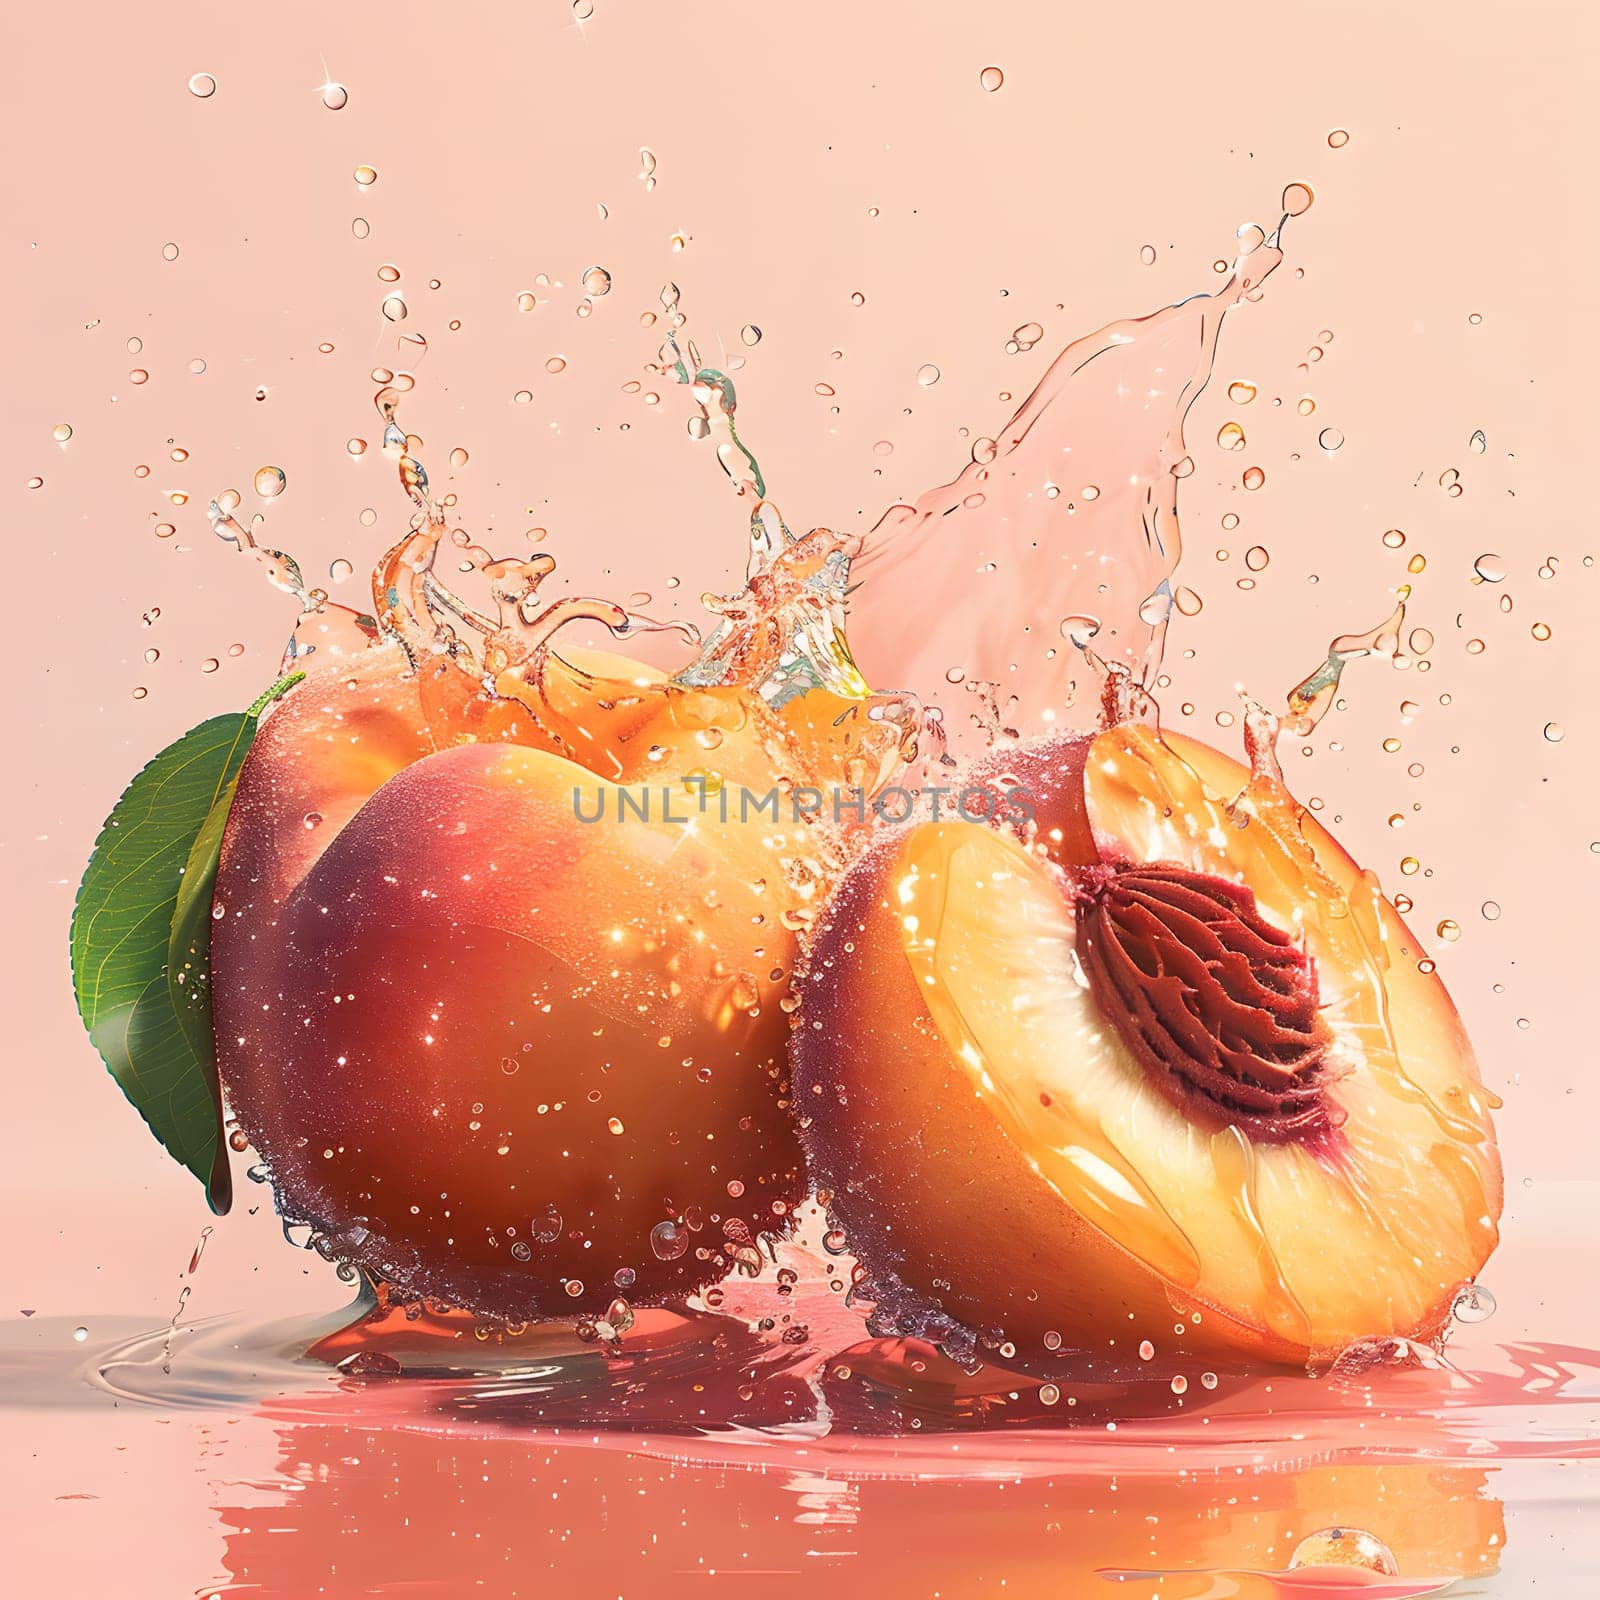 A peach, a natural food and ingredient in cuisine, is being splashed with water on a pink background, highlighting its freshness and juiciness